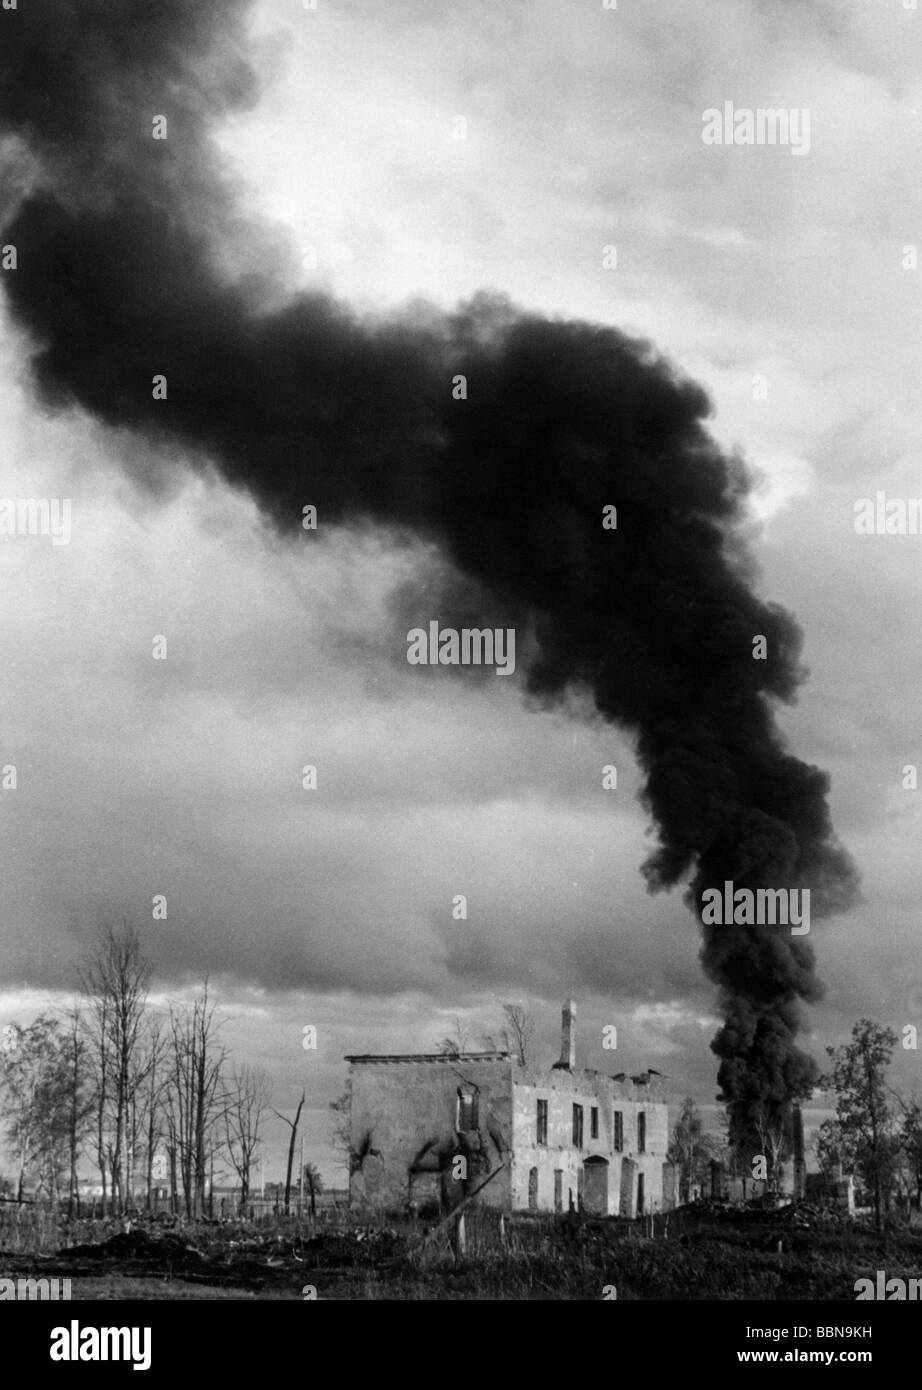 events, Second World War / WWII, Russia 1942 / 1943, partisan warfare, Soviet village, destroyed during fightings against partisans, circa 1942, ruin, ruins, destruction, Third Reich, 20th century, historic, historical, USSR, Soviet Union, smoke, Eastern Front, burning, 1940s, Stock Photo